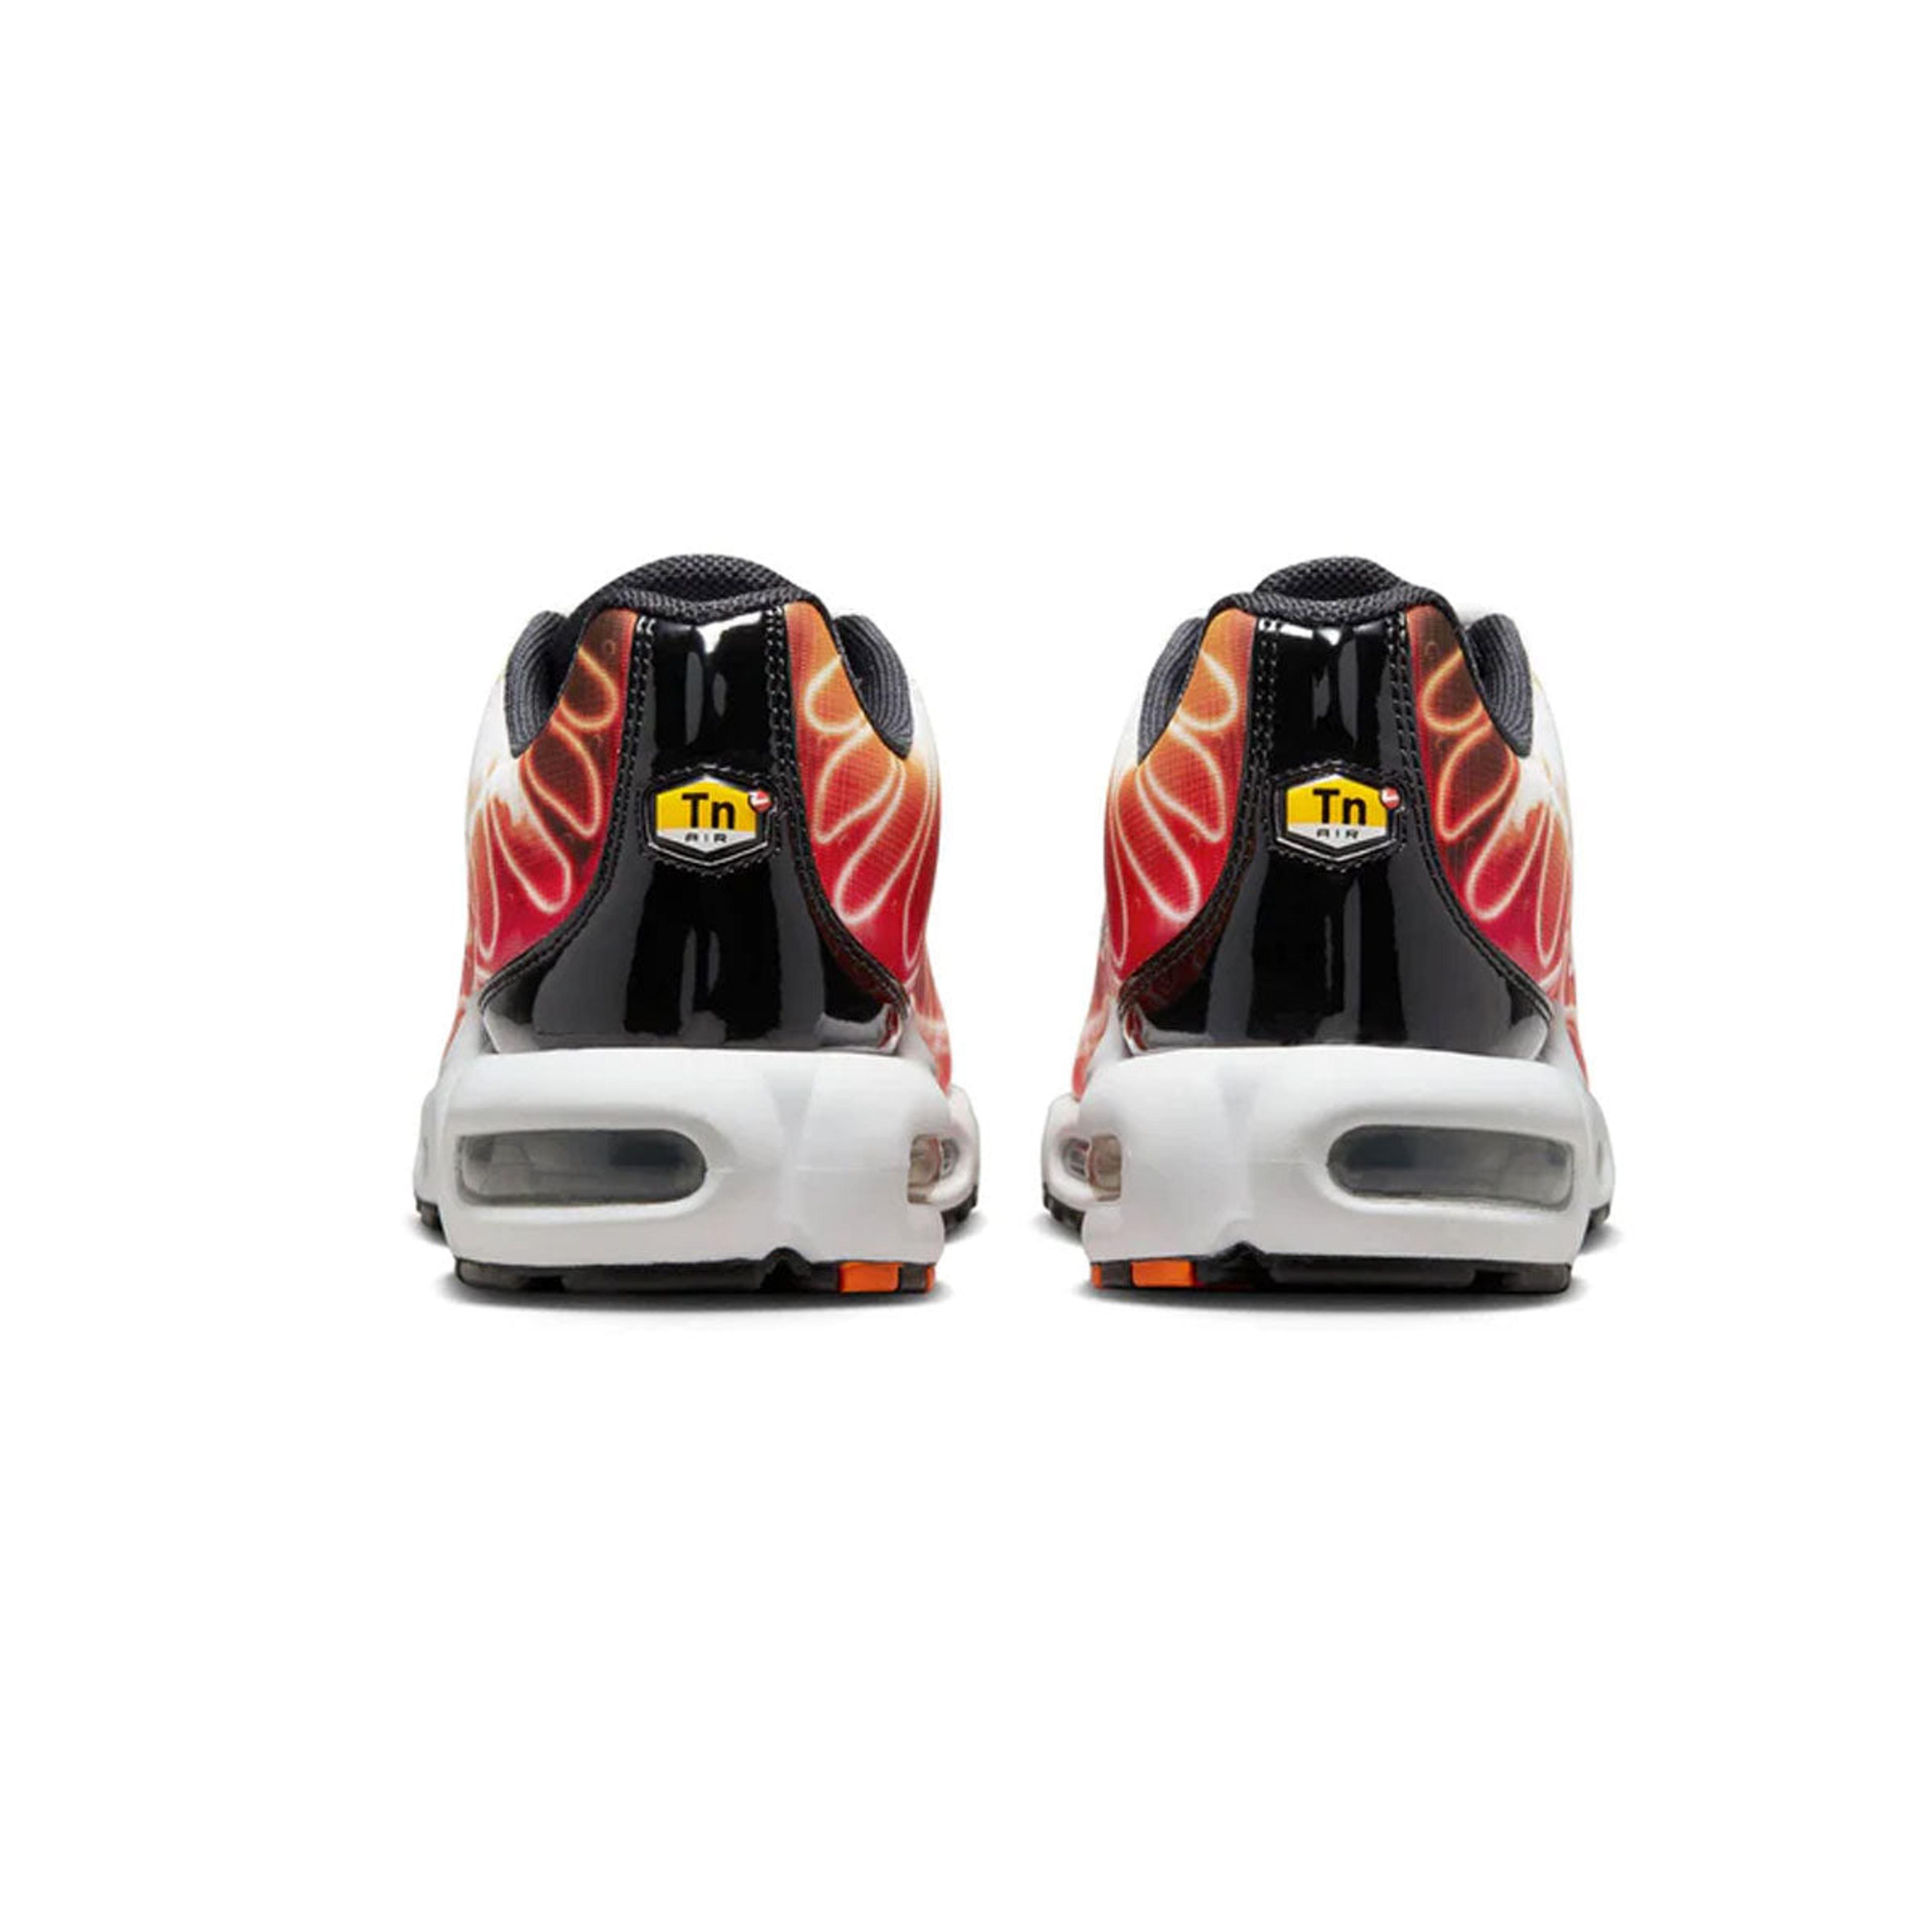 Alternate View 2 of Nike Men's Air Max Plus Light Photography